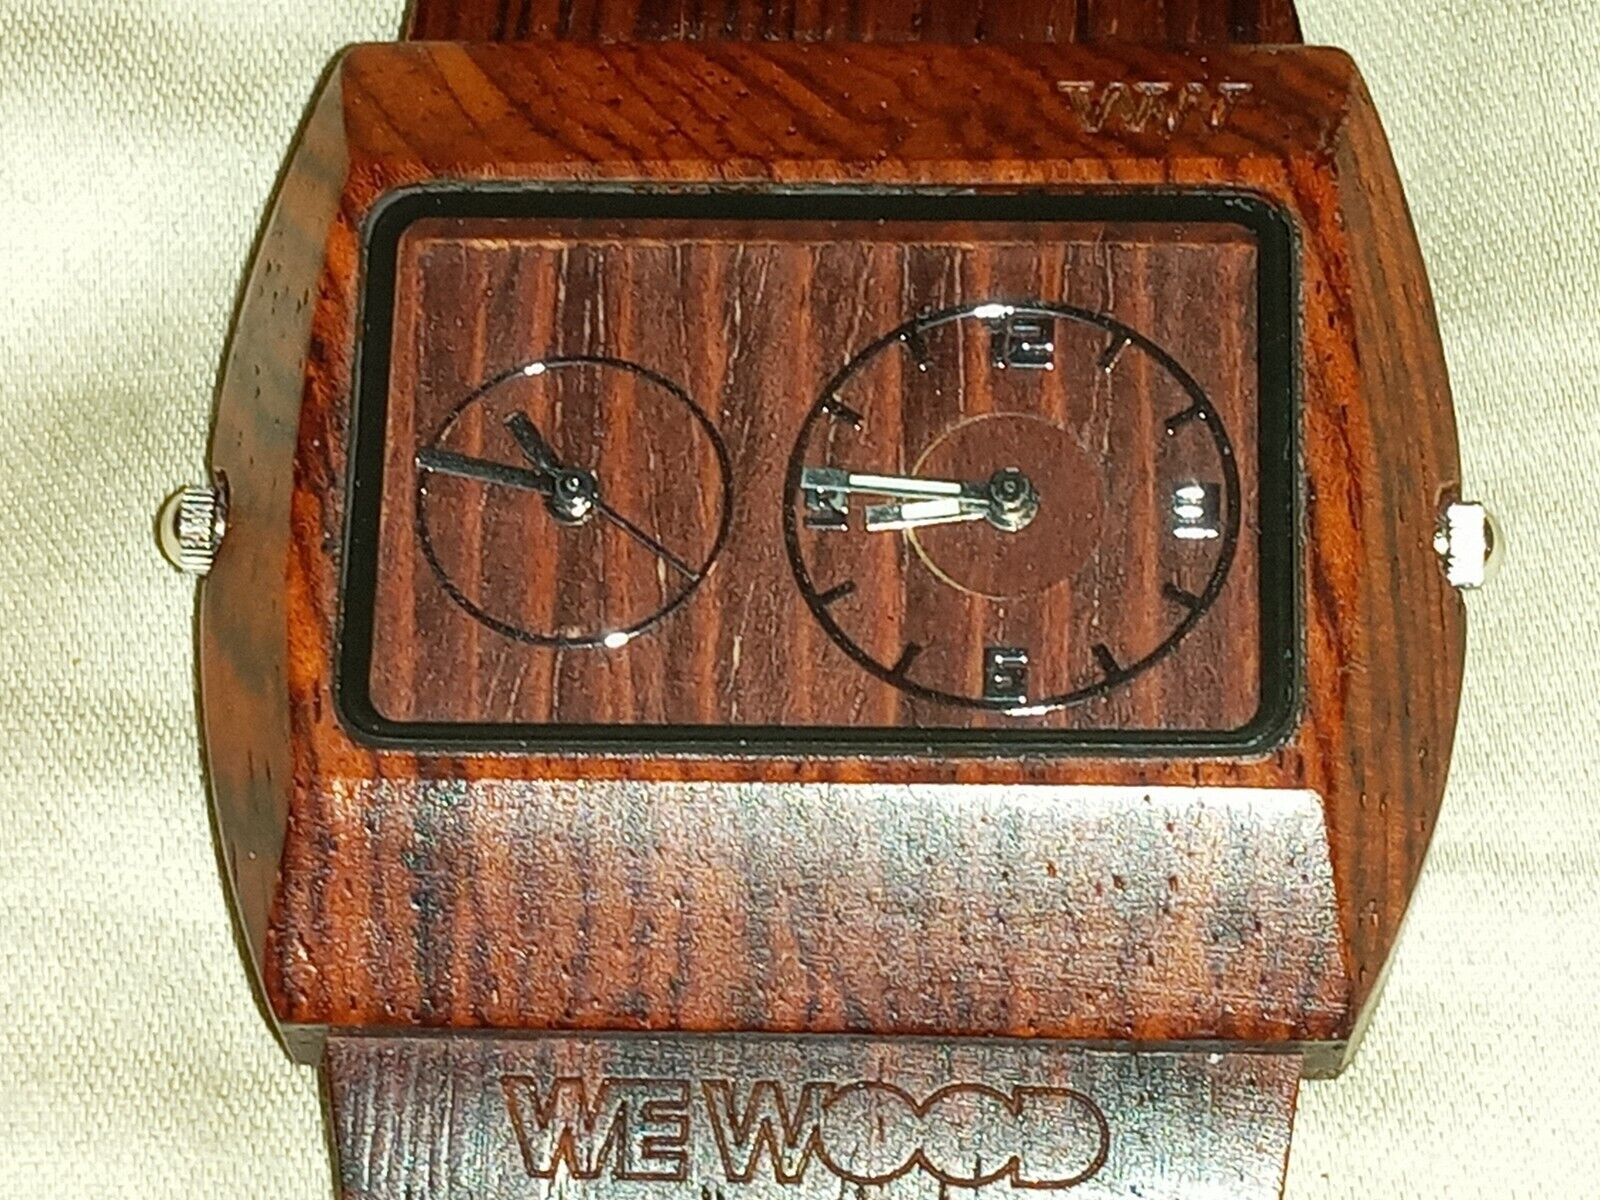 WEWOOD Watch Wood / Wooden JUPITER RS BLACK Dual Time A11 Men's (334)